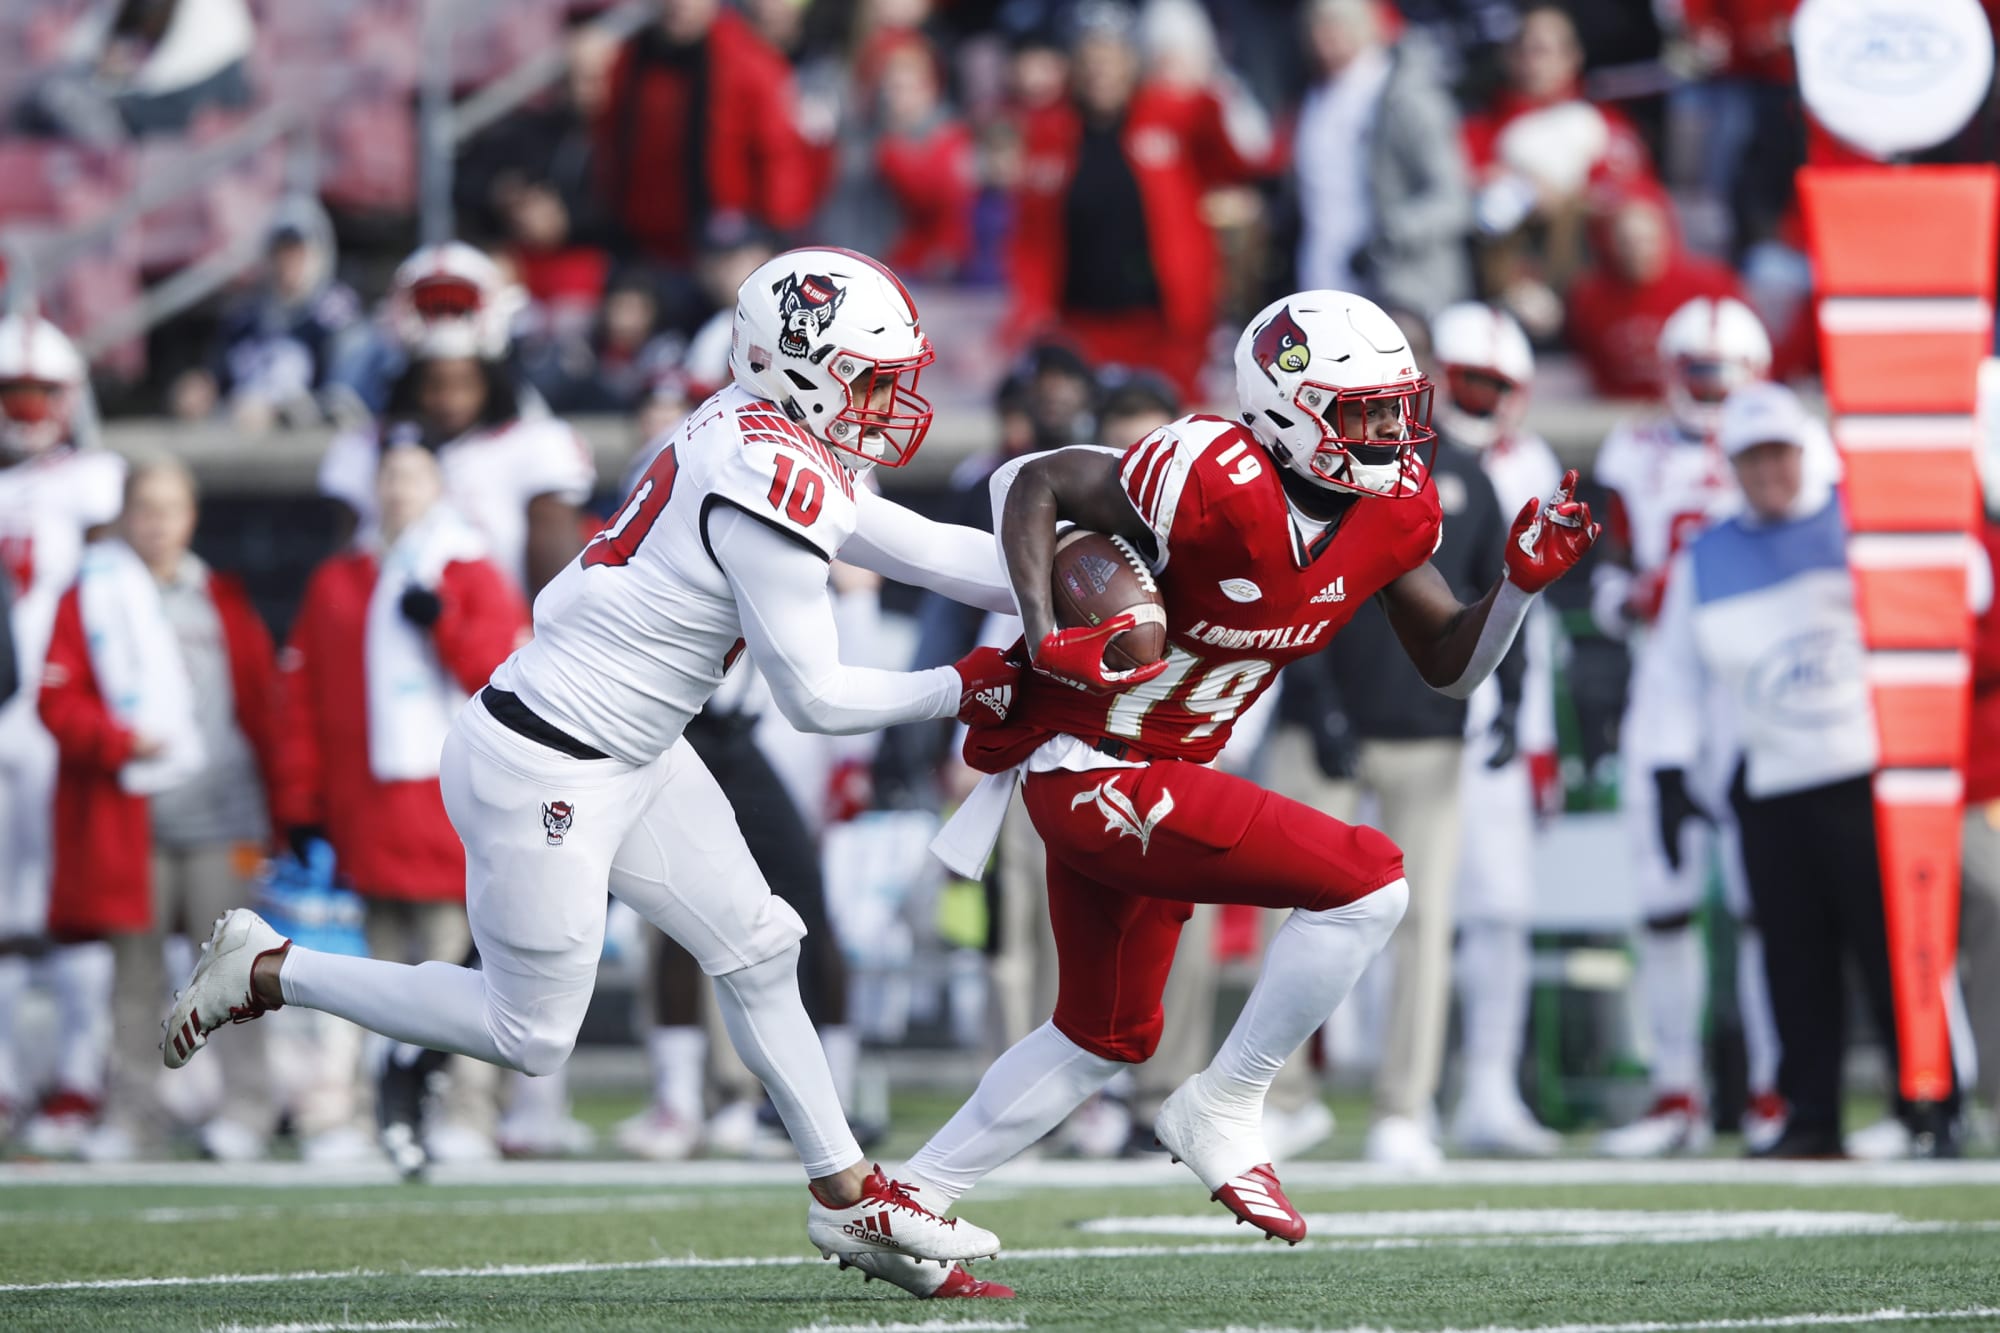 Louisville football could be towards bowl eligibility against NC State